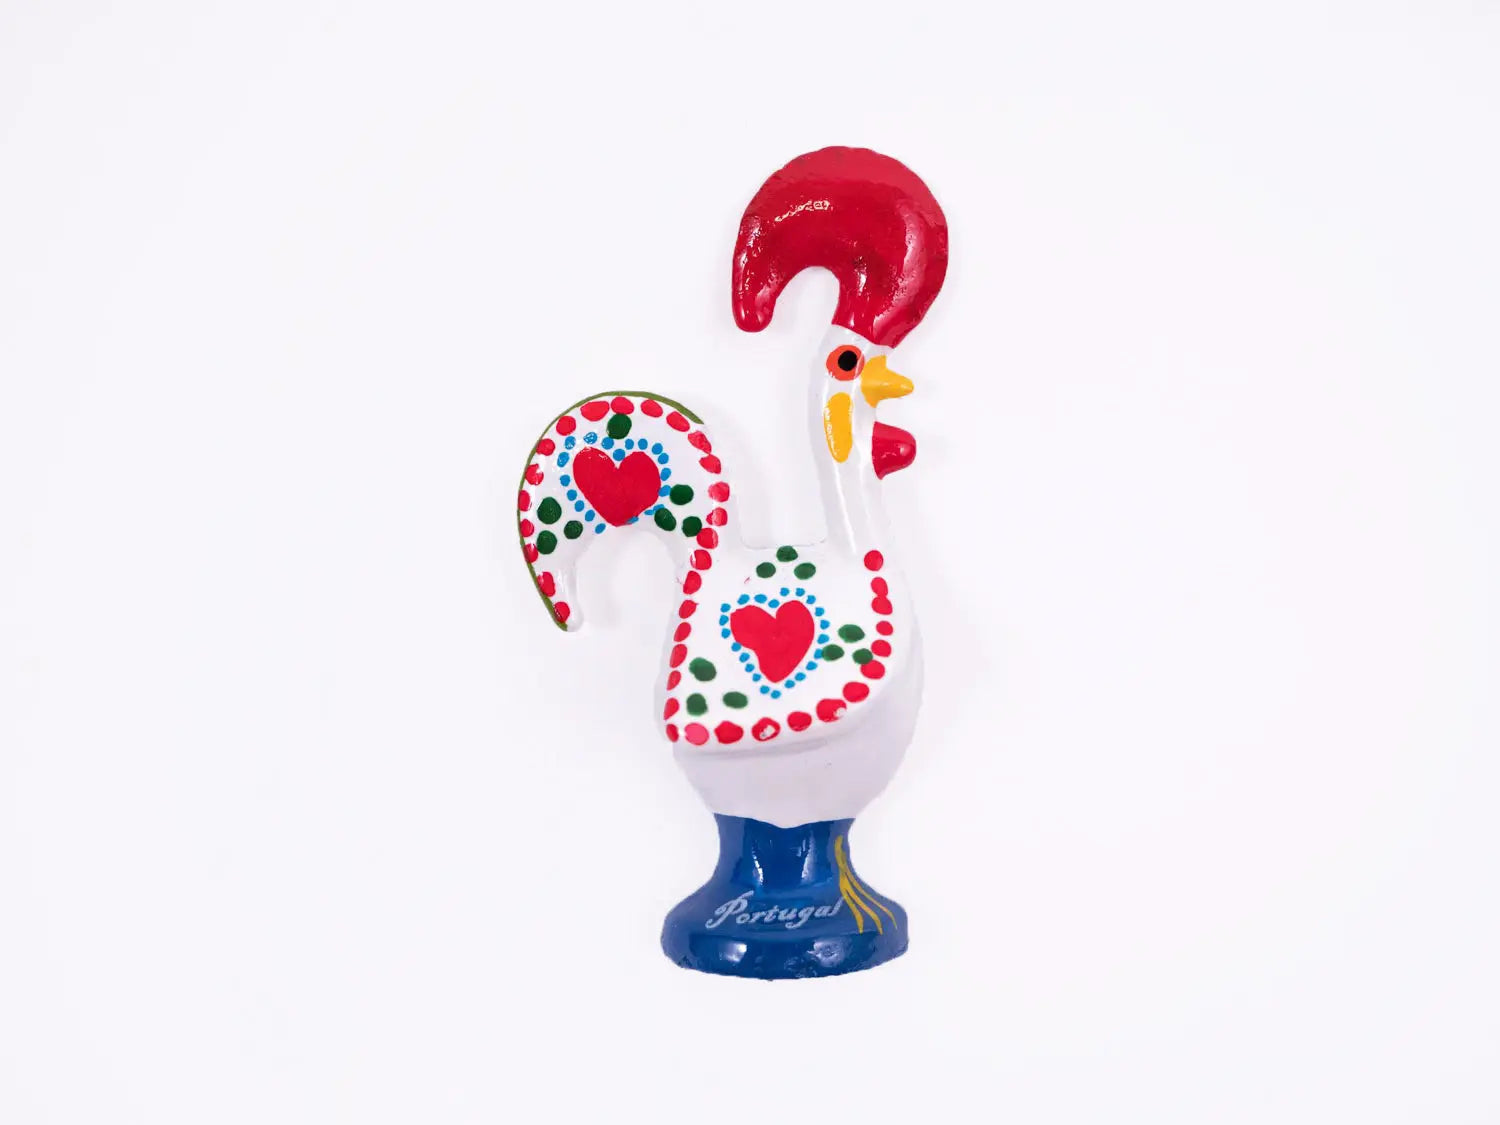 Portuguese Inspired Barcelos Rooster Magnet in White-Rooster Camisa